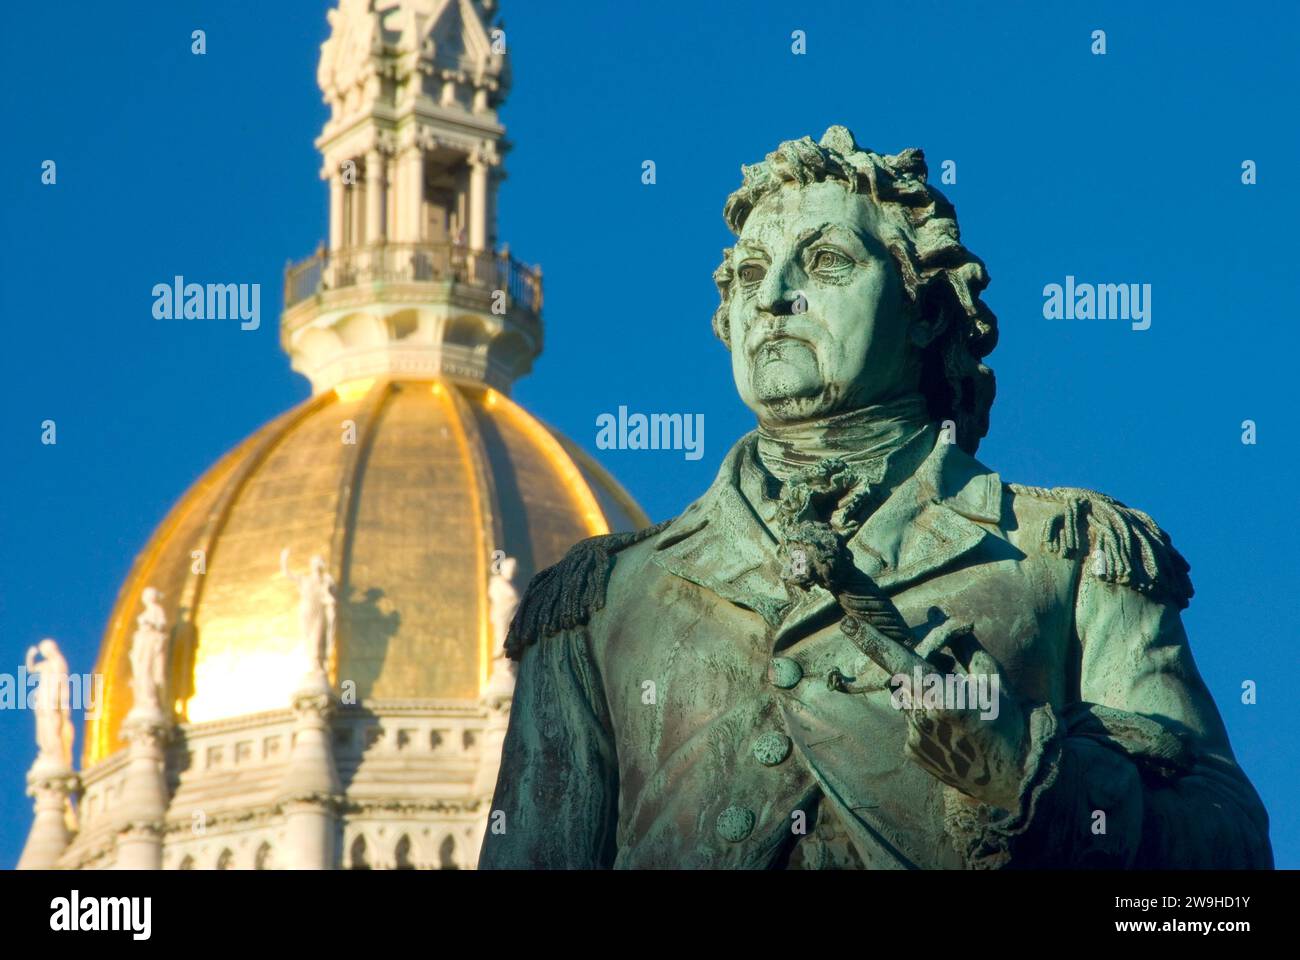 Connecticut State Capitol with Israel Putnam statue, Bushnell Park, Hartford, Connecticut Stock Photo